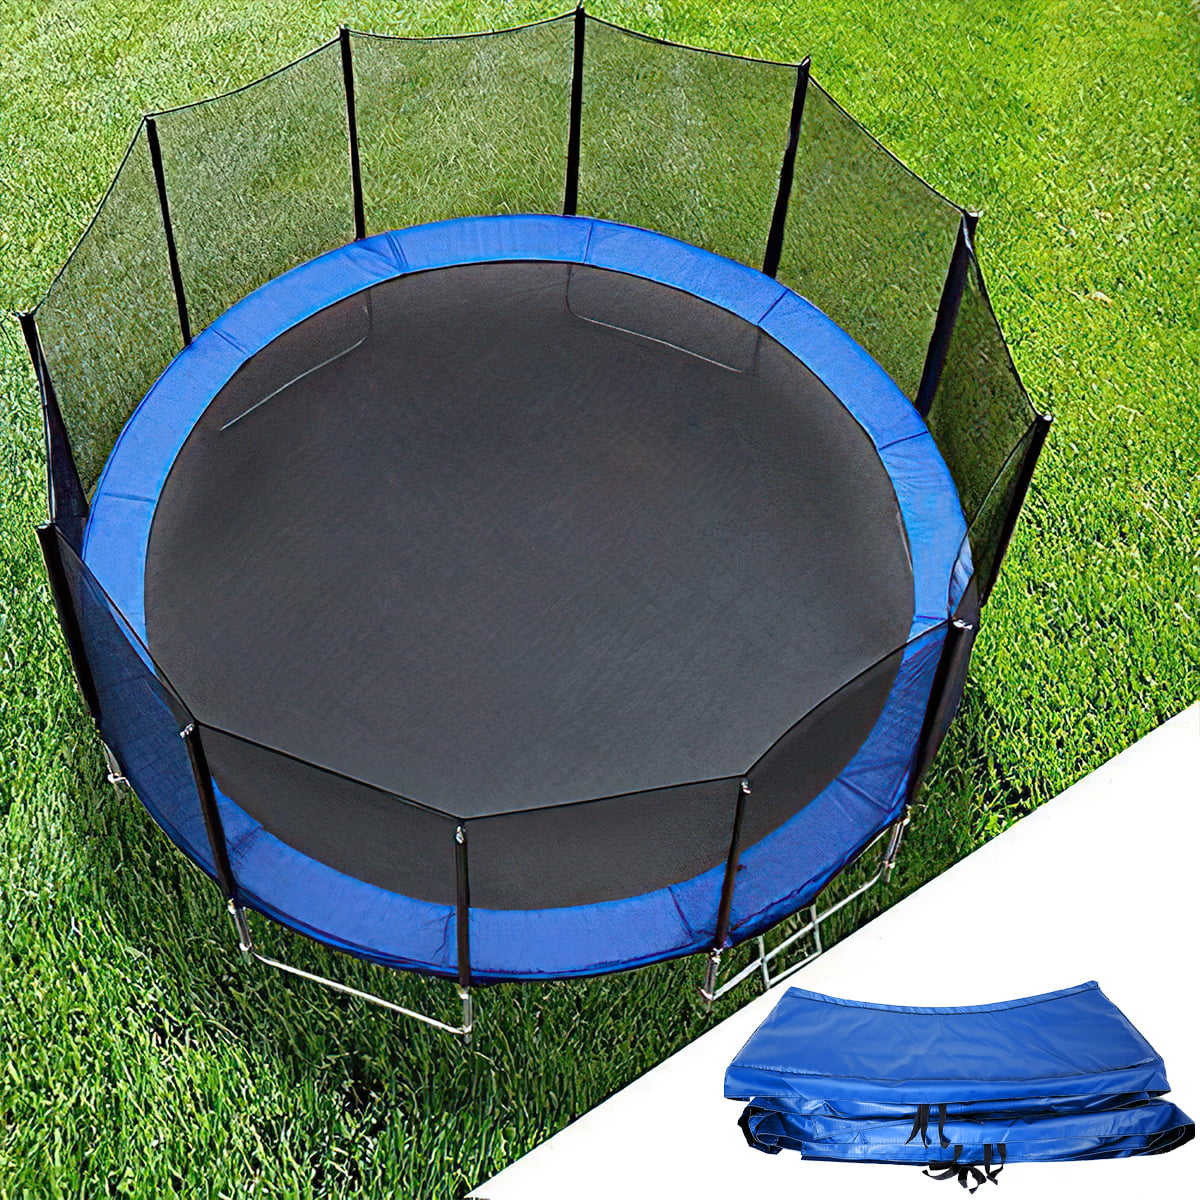 Safety Frame Spring Pad Jumping Pad Replacement Pad Cover Trampoline 10 12 14FT 